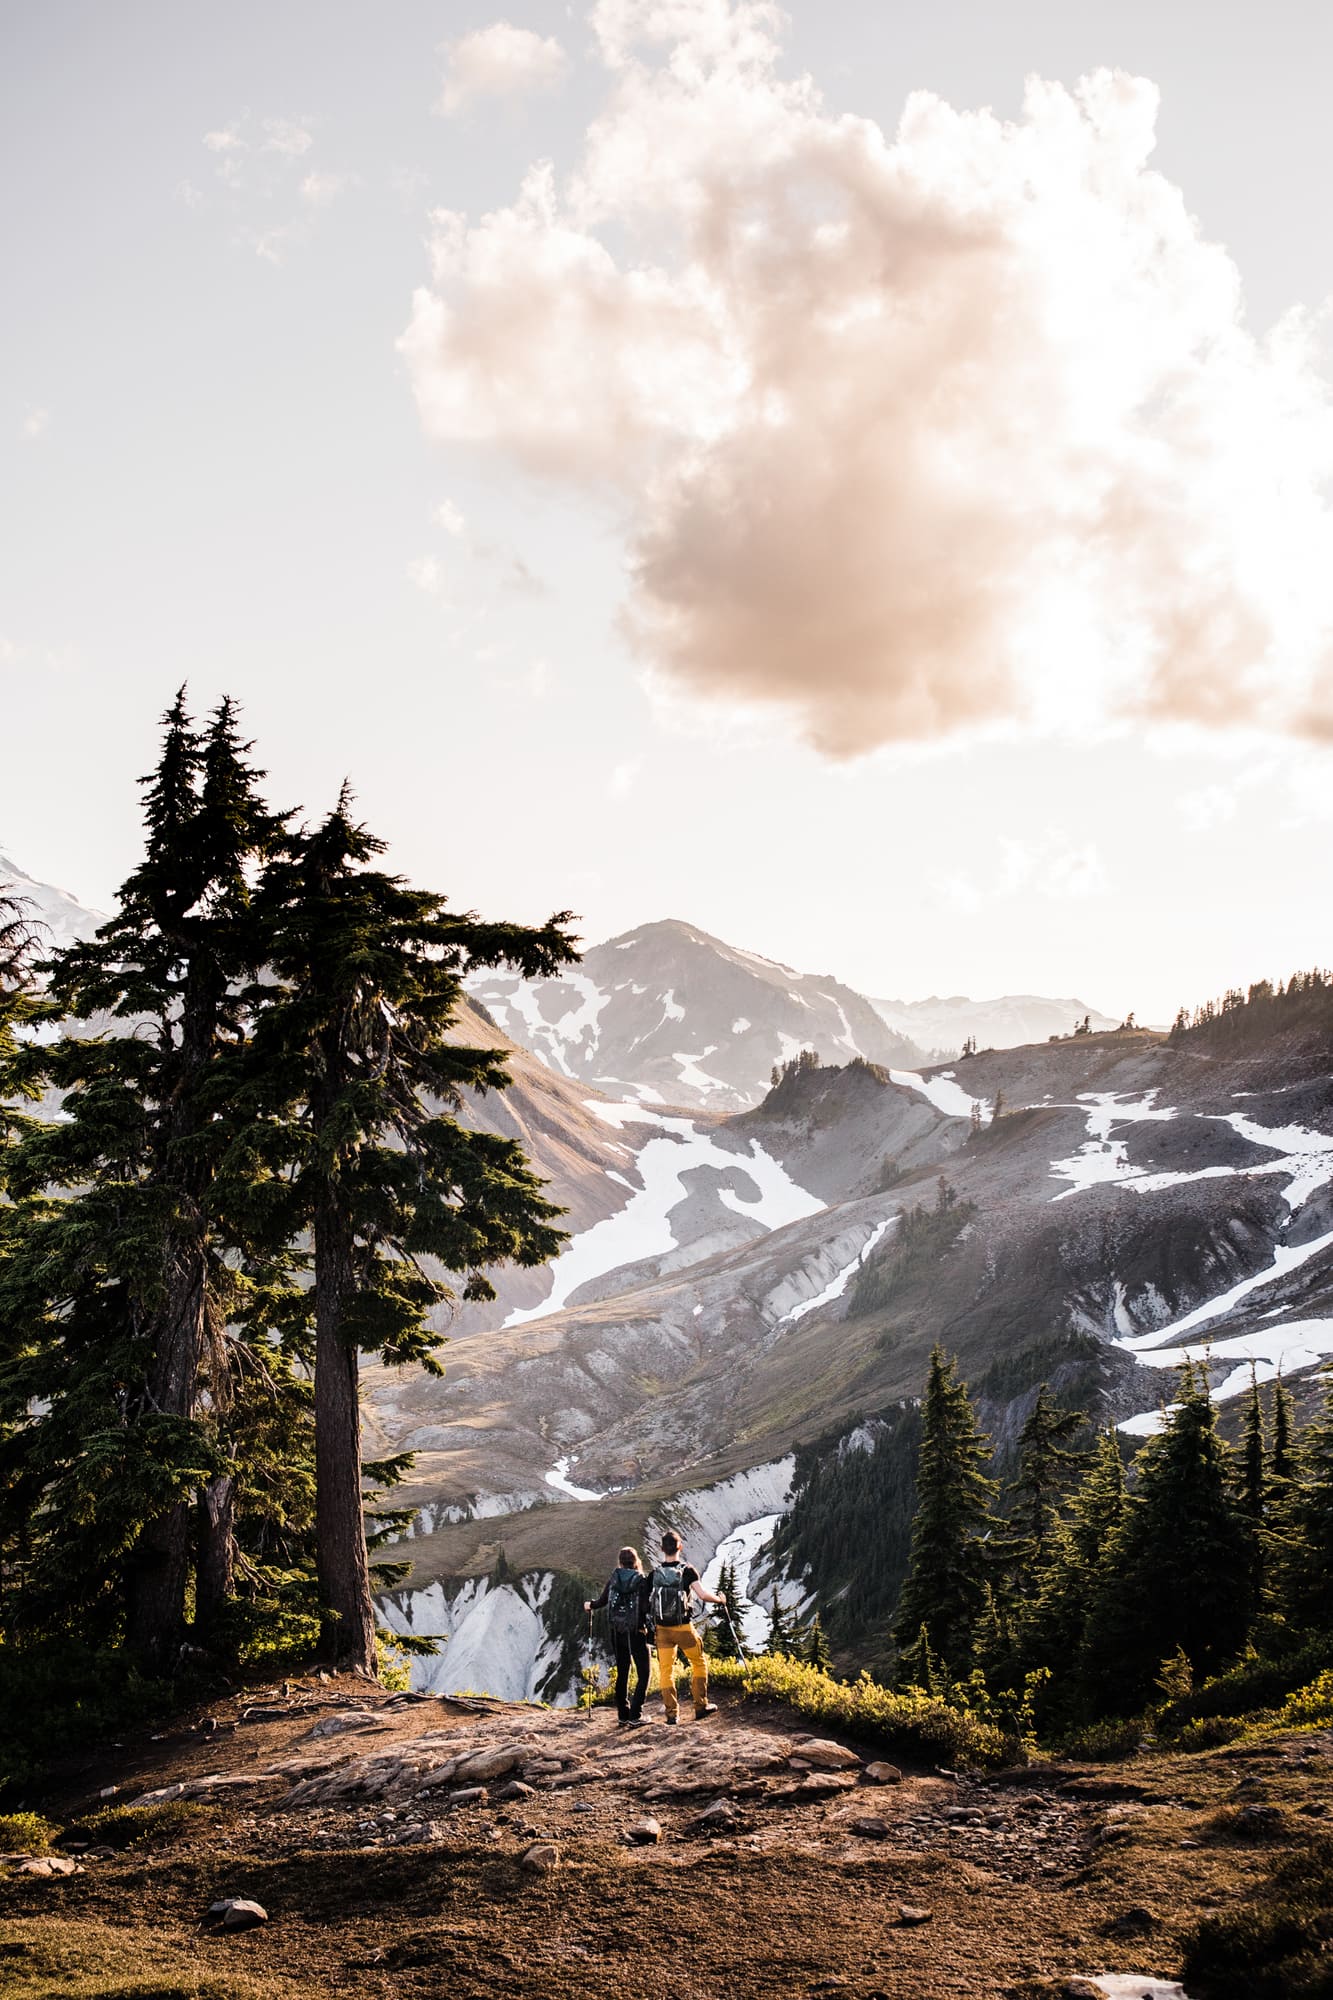 If you want to elope in Washington, this Washington elopement planning guide is for you! We talk best places, seasons, and a planning checklist!